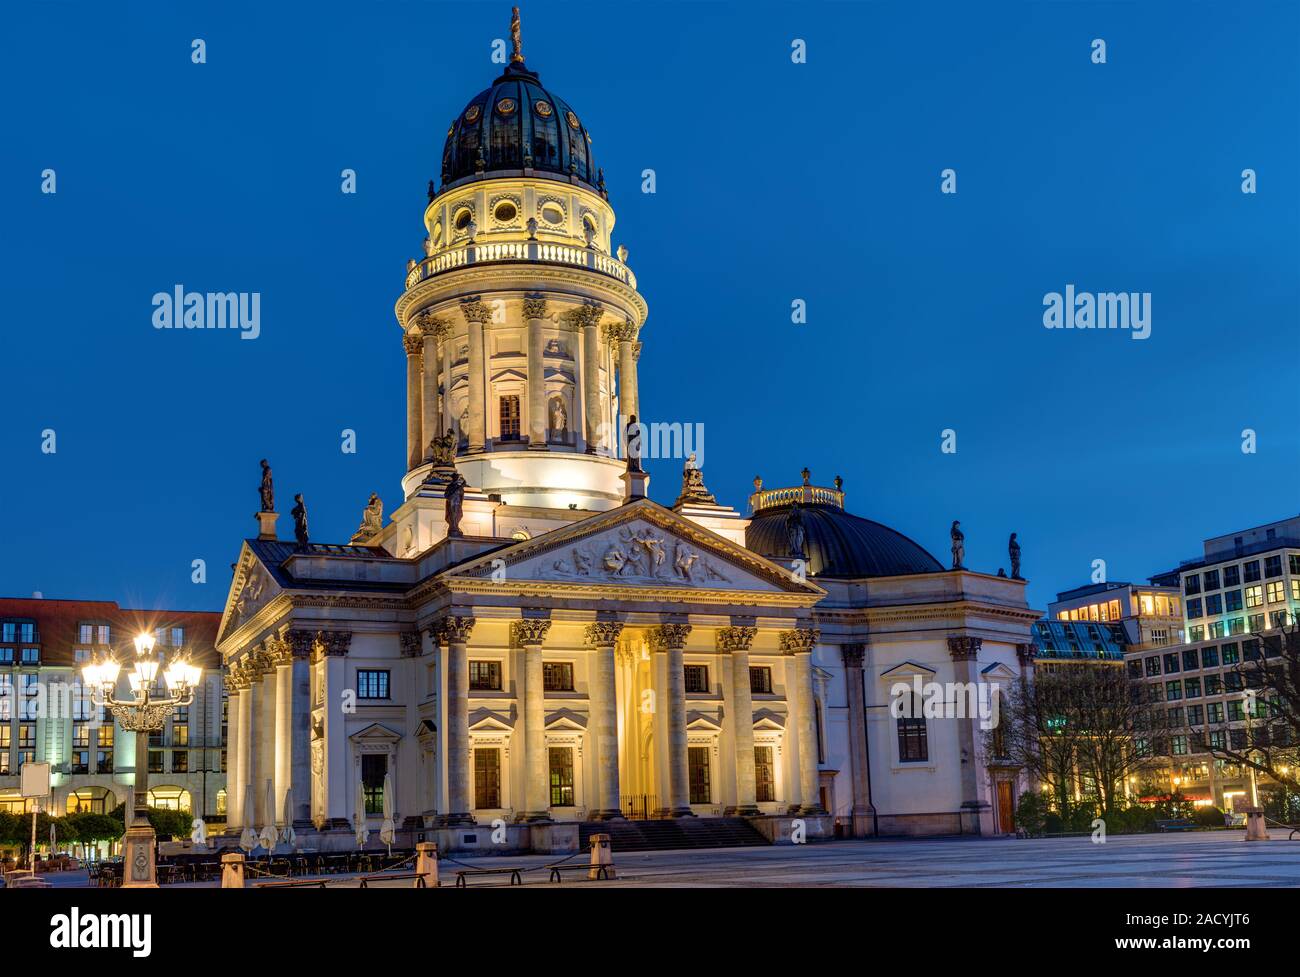 One of the two churches at the Gendarmenmarkt in Berlin at night Stock Photo